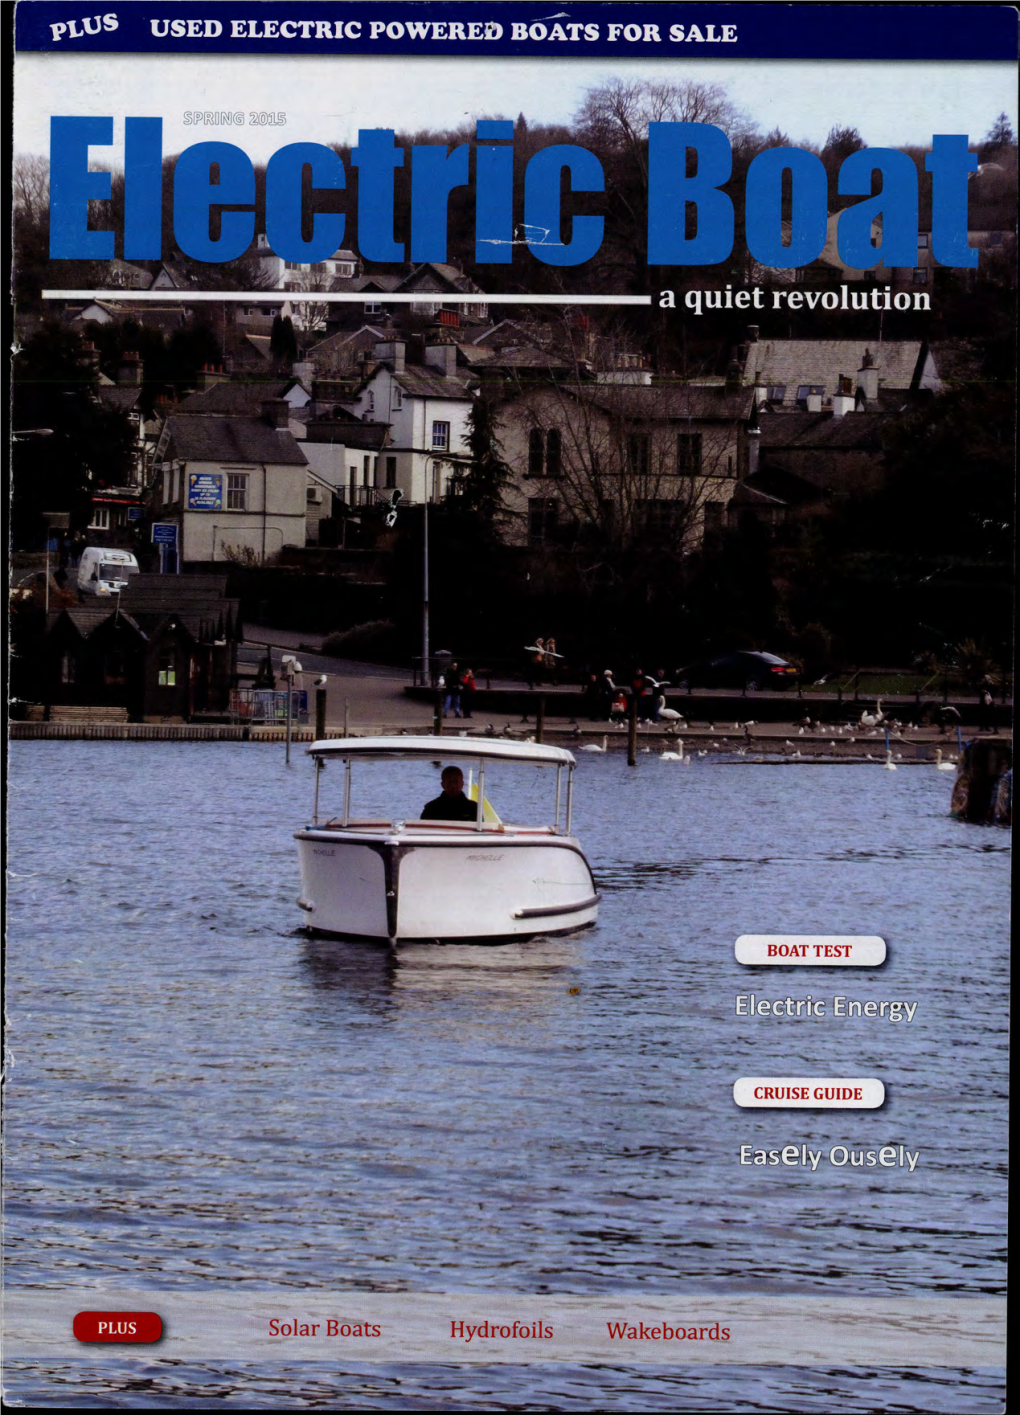 Spring 2015 J Electric Boat Contact